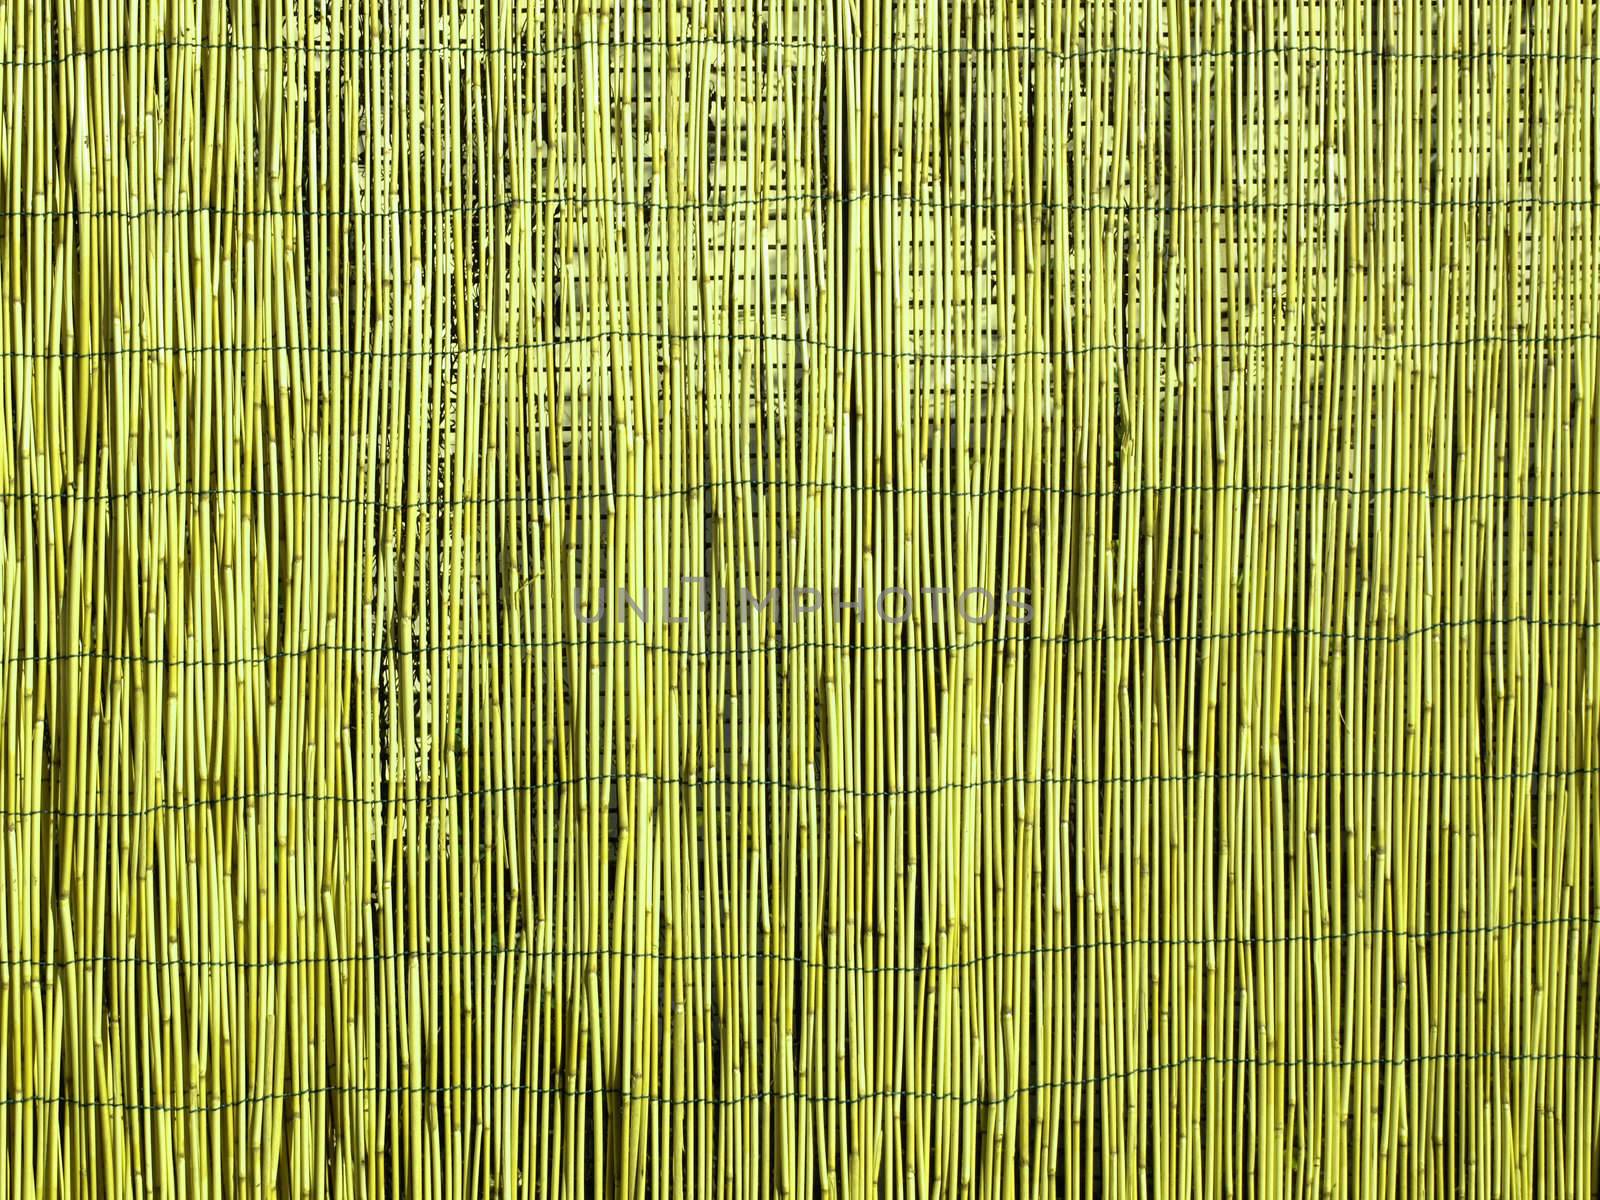 Bamboo fence or wall background